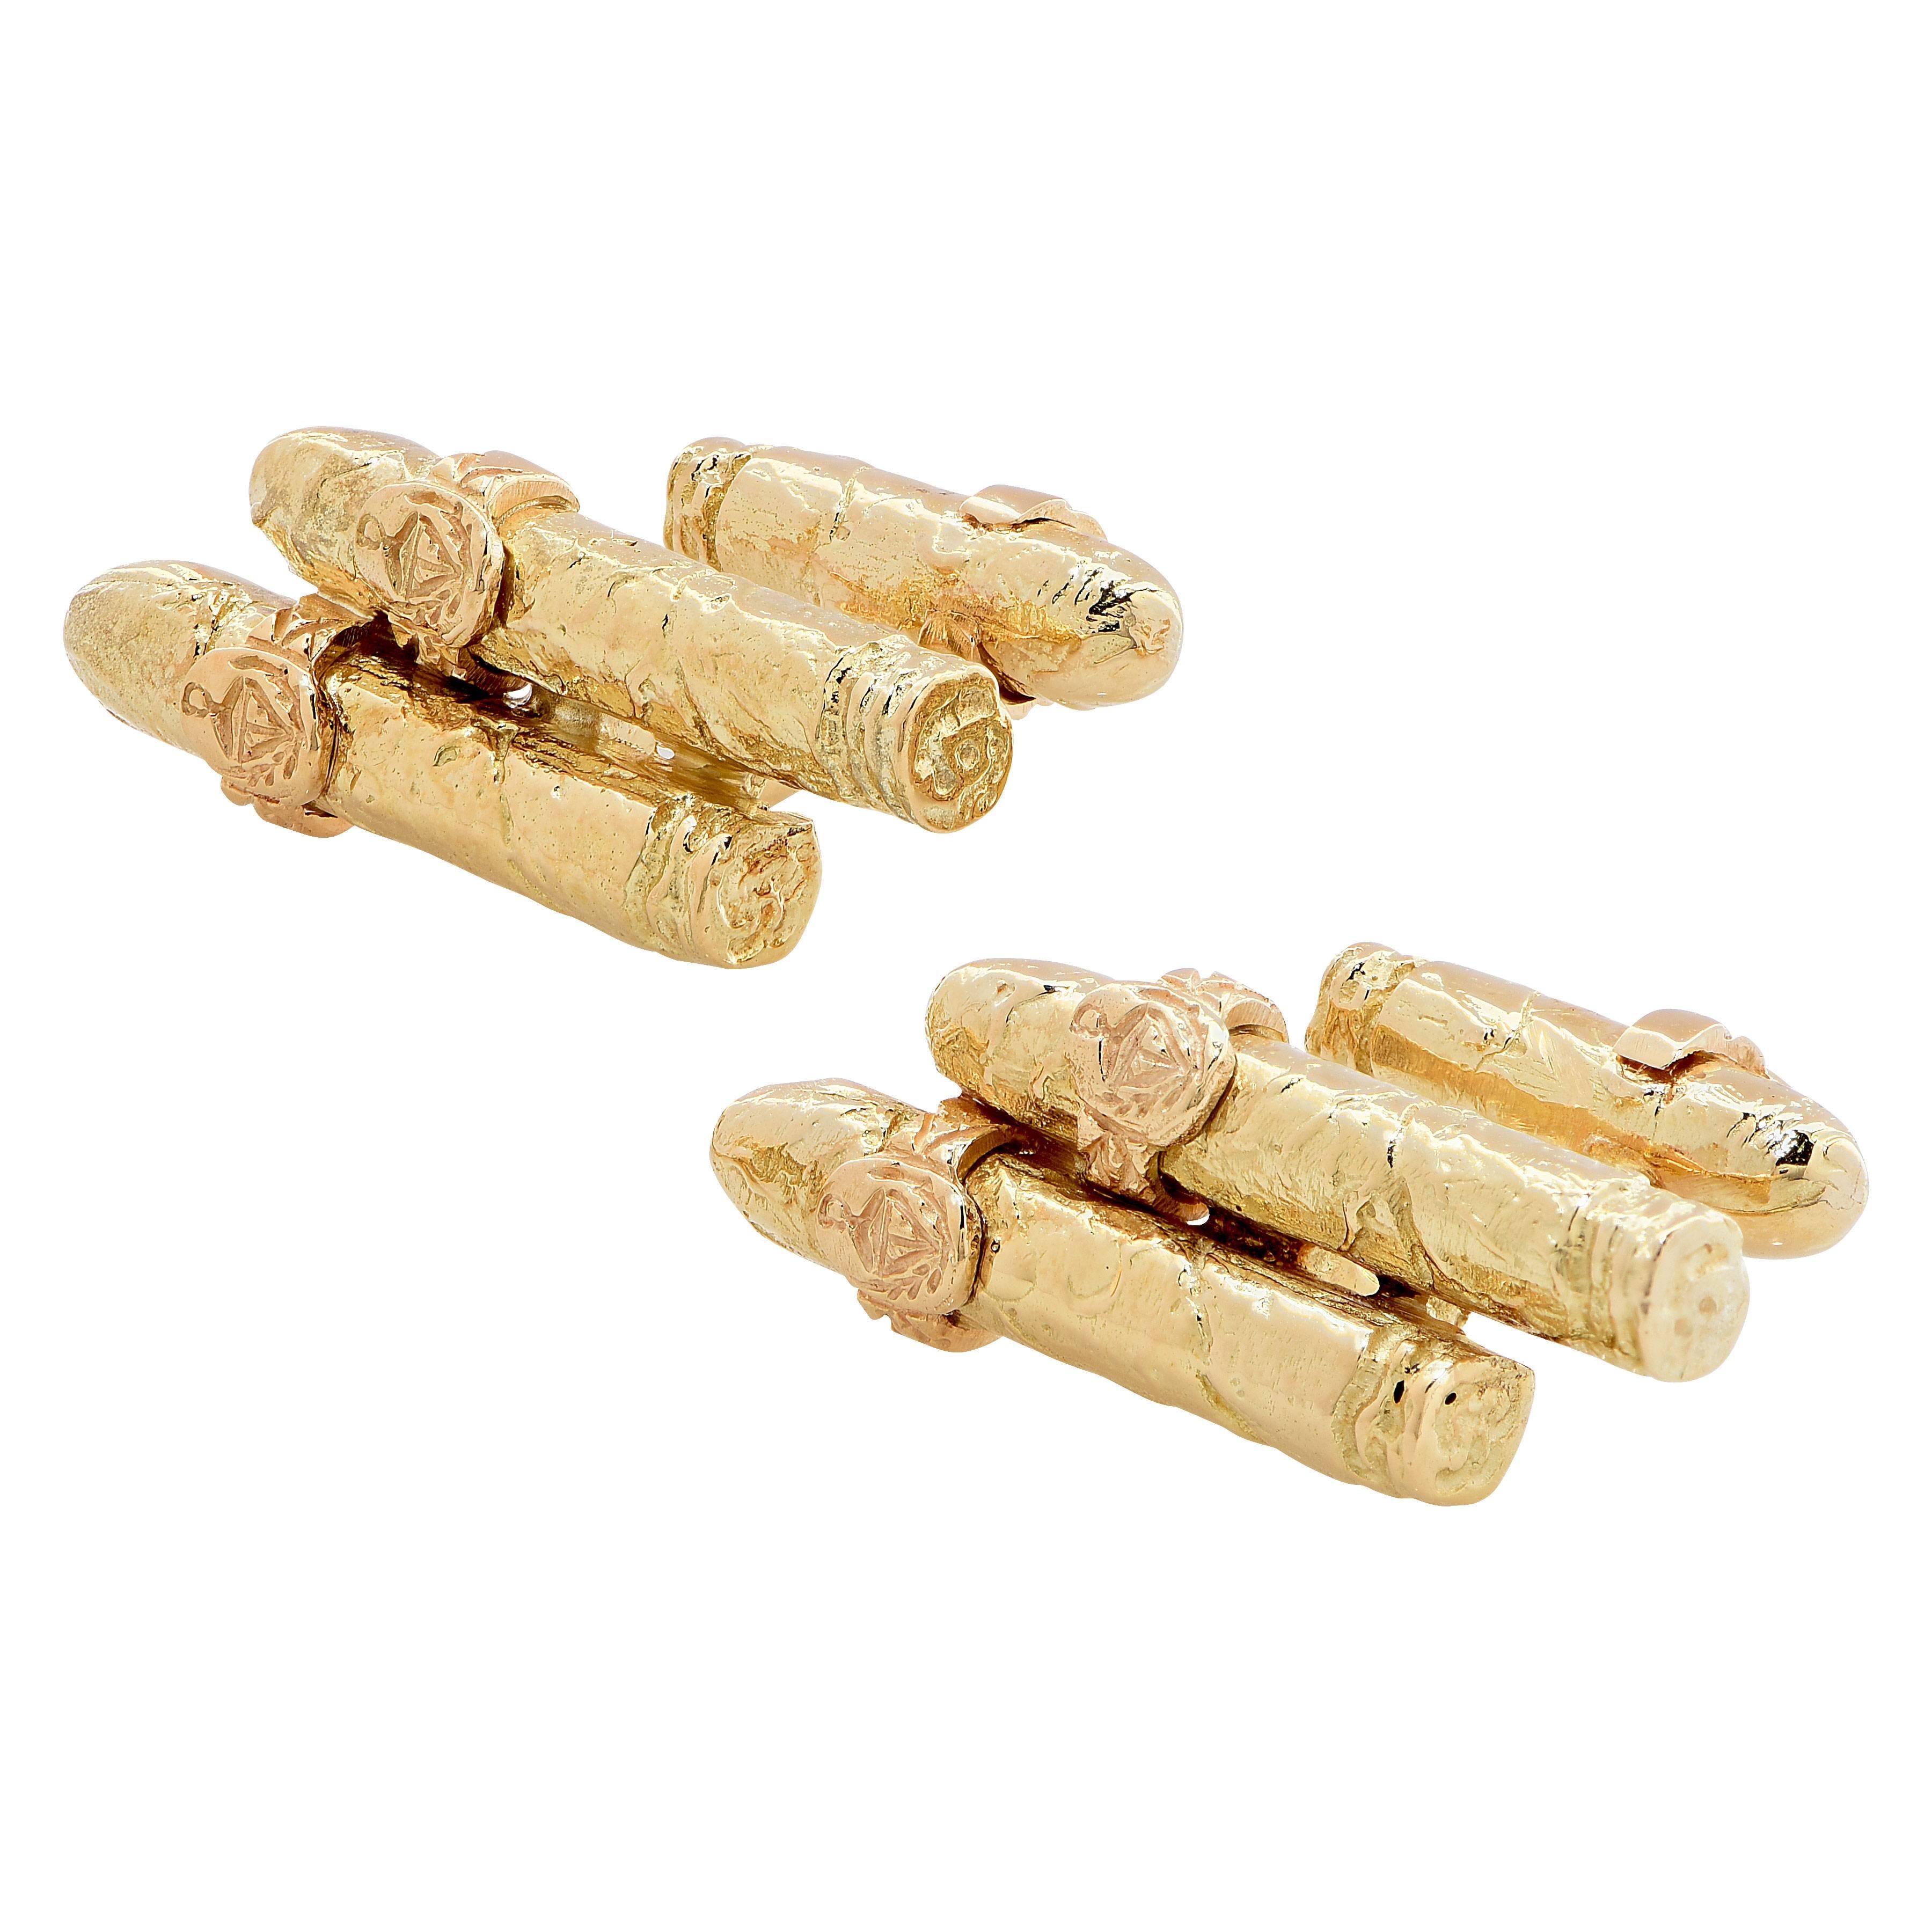 Cufflinks with double cigar motif on the front, and a single cigar in the back.
18K yellow gold. 32.7 grams.